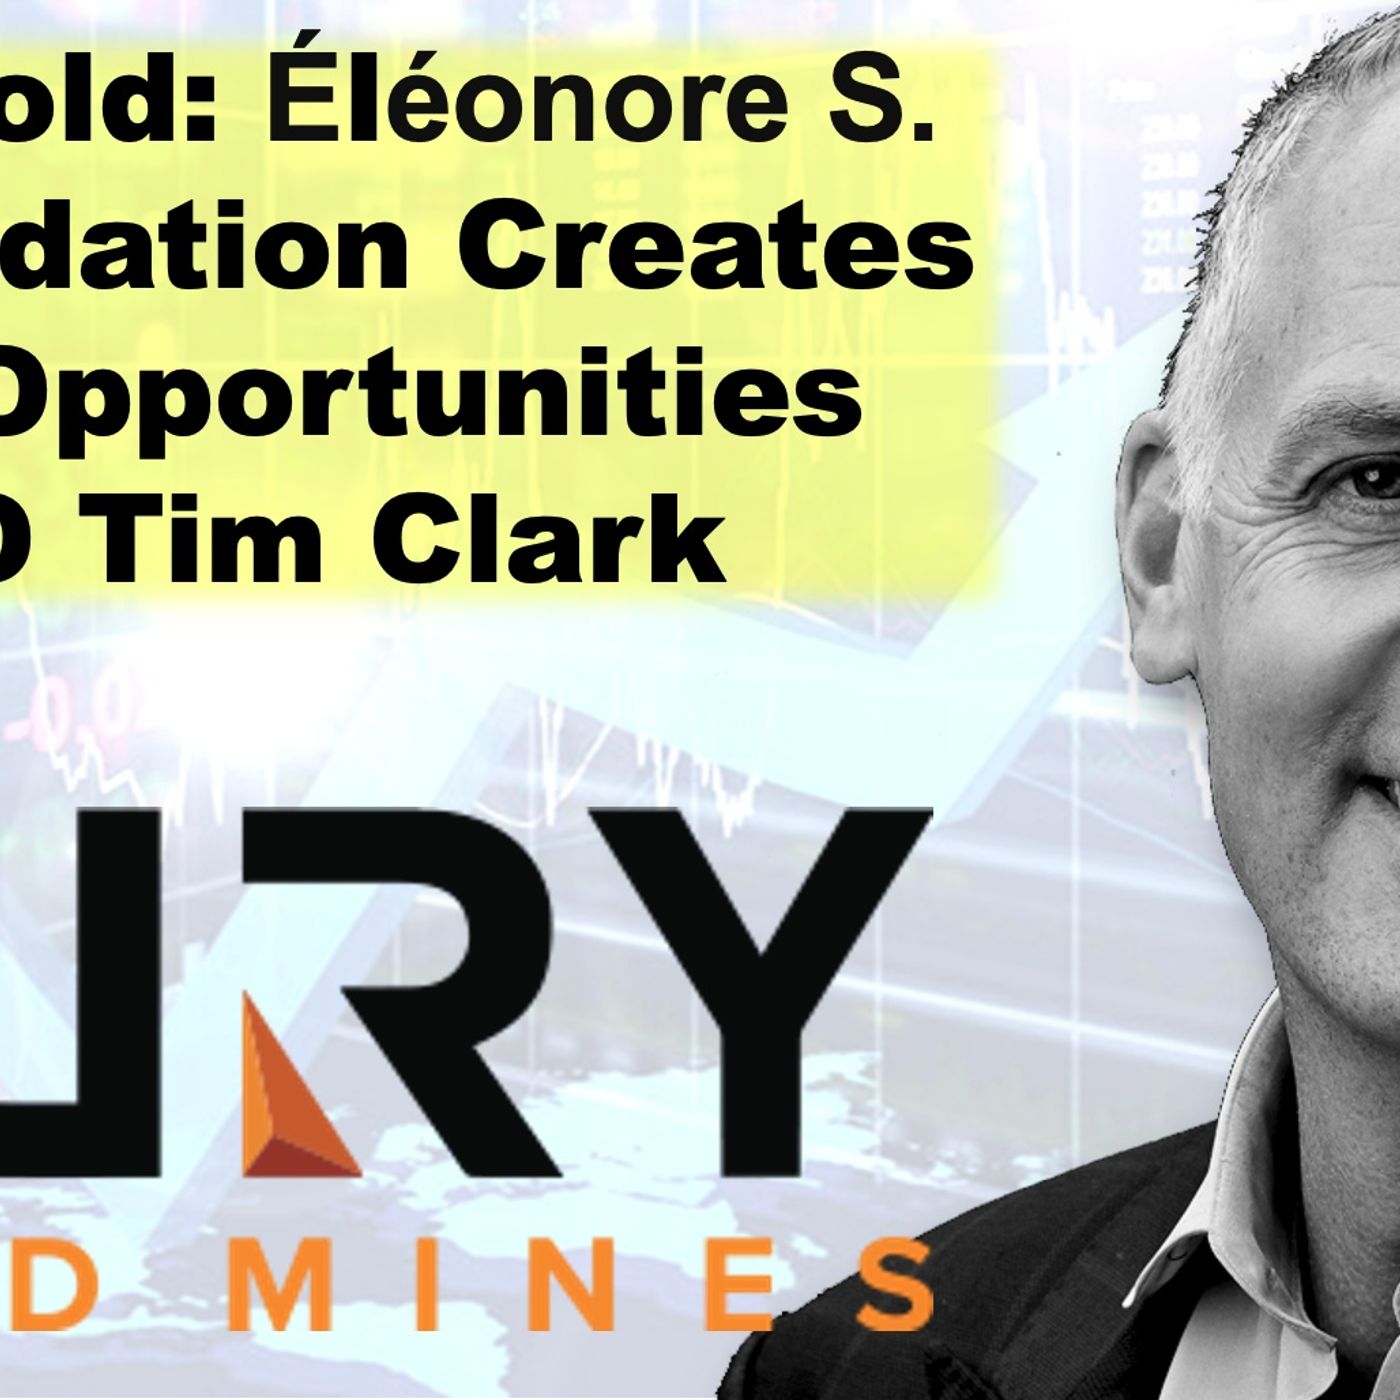 Fury Gold: Éléonore South Consolidation Creates New Opportunities CEO Tim Clark